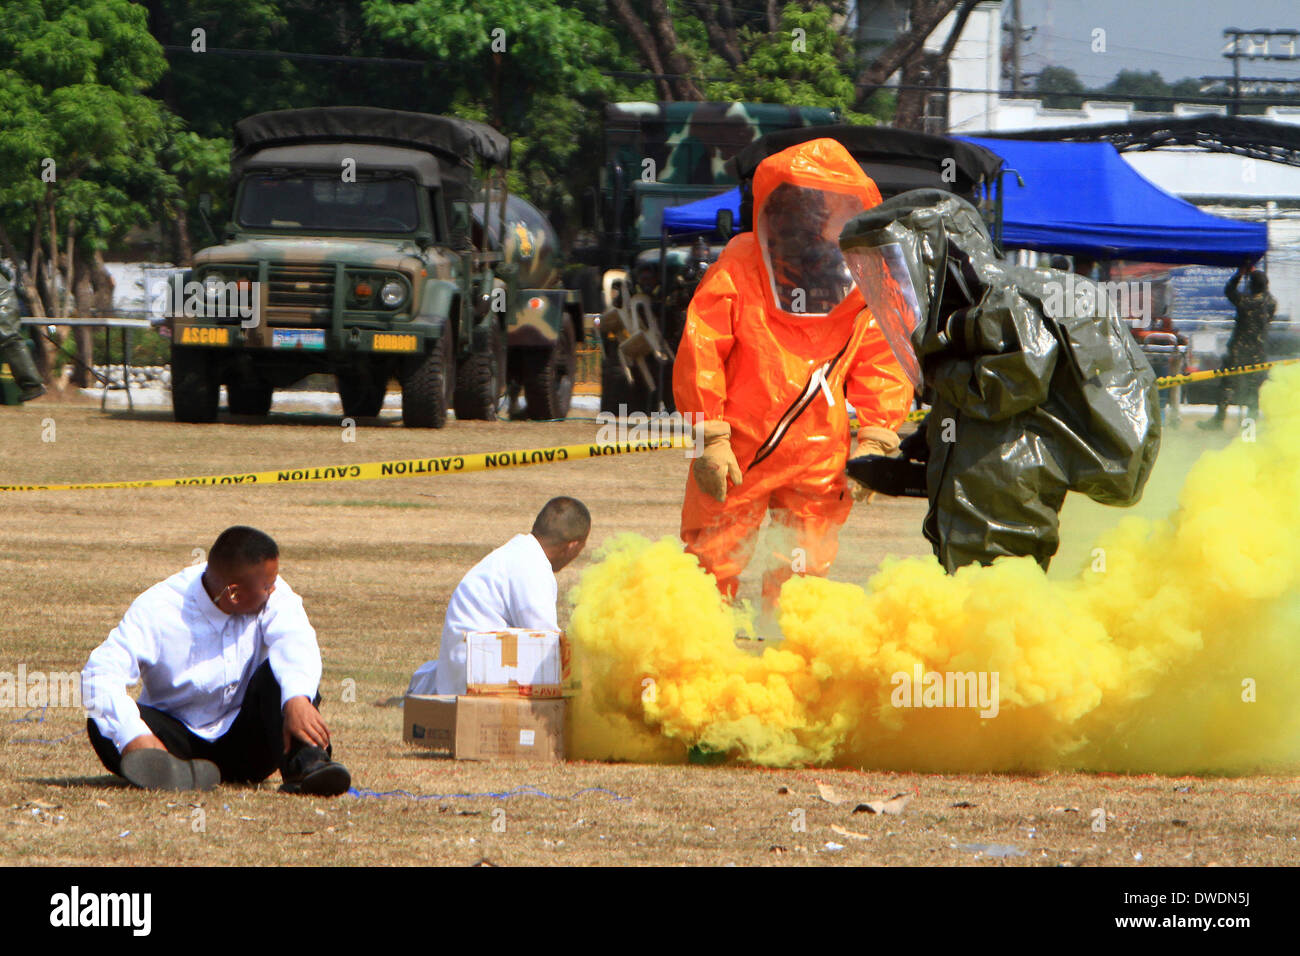 Quezon City, Philippines. 6th Mar, 2014. Soldiers from the Philippine Army wearing hazmat suits rescue mock victims during the Chemical, Biological, Radiological, and Nuclear Explosive (CBRNE) capability demonstration at Camp Aguinaldo in Quezon City, the Philippines, March 6, 2014. Credit:  Rouelle Umali/Xinhua/Alamy Live News Stock Photo